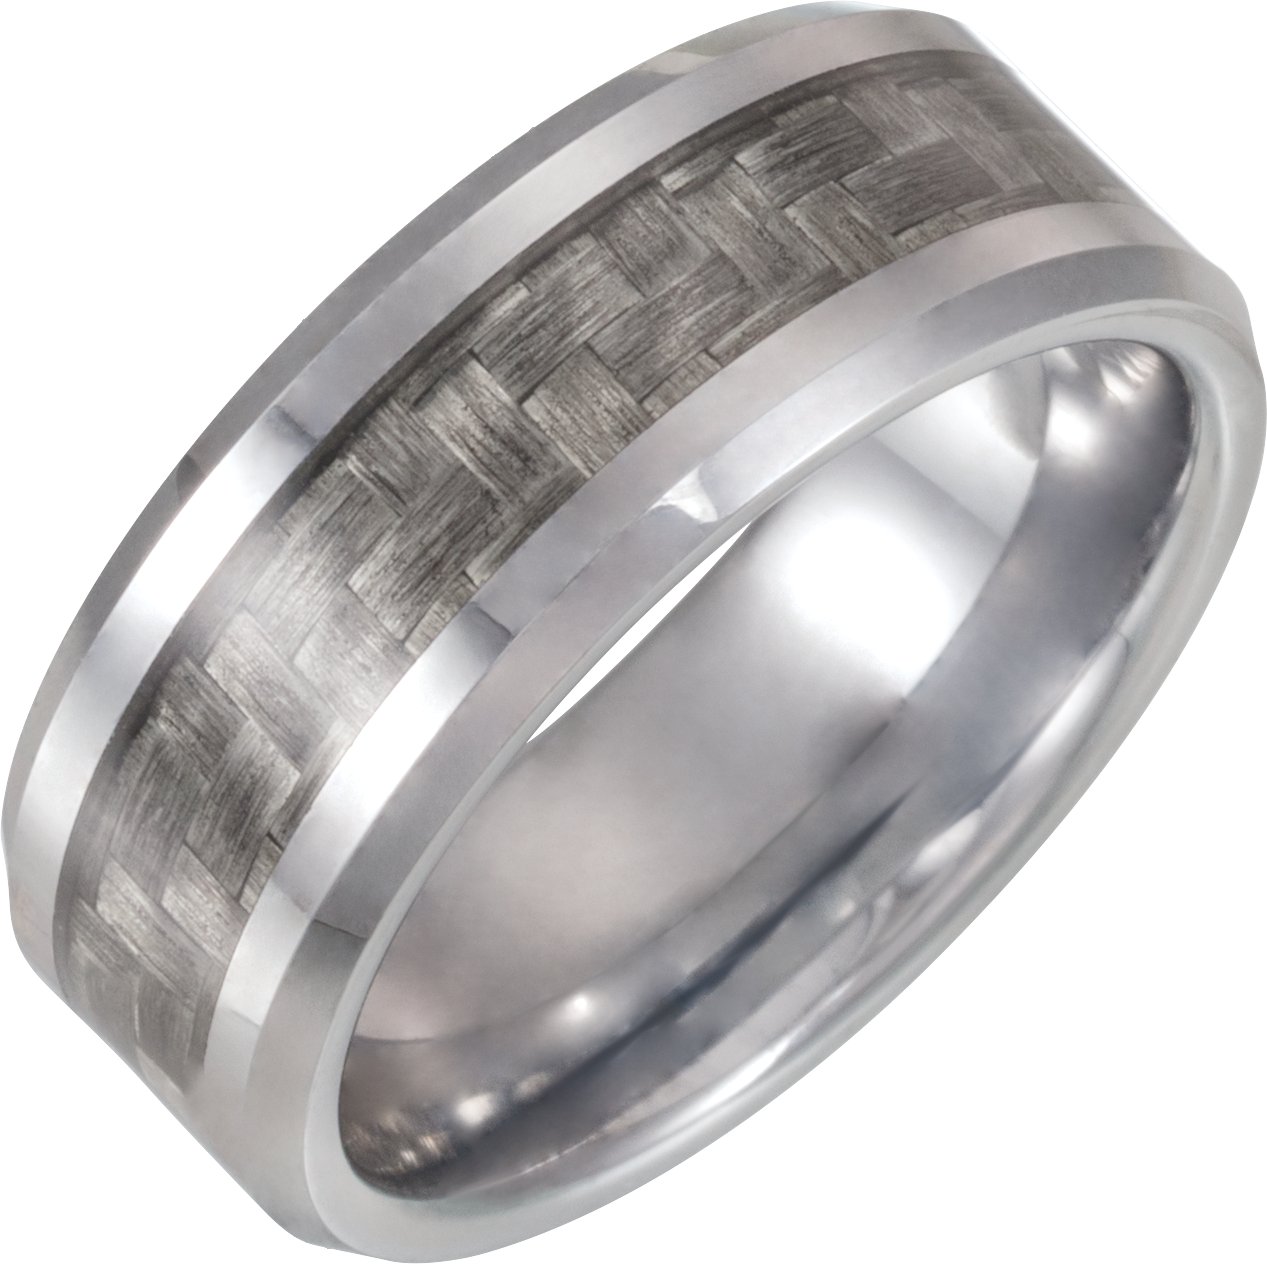 Tungsten 8 mm Band with Carbon Fiber Inlay Size 11.5